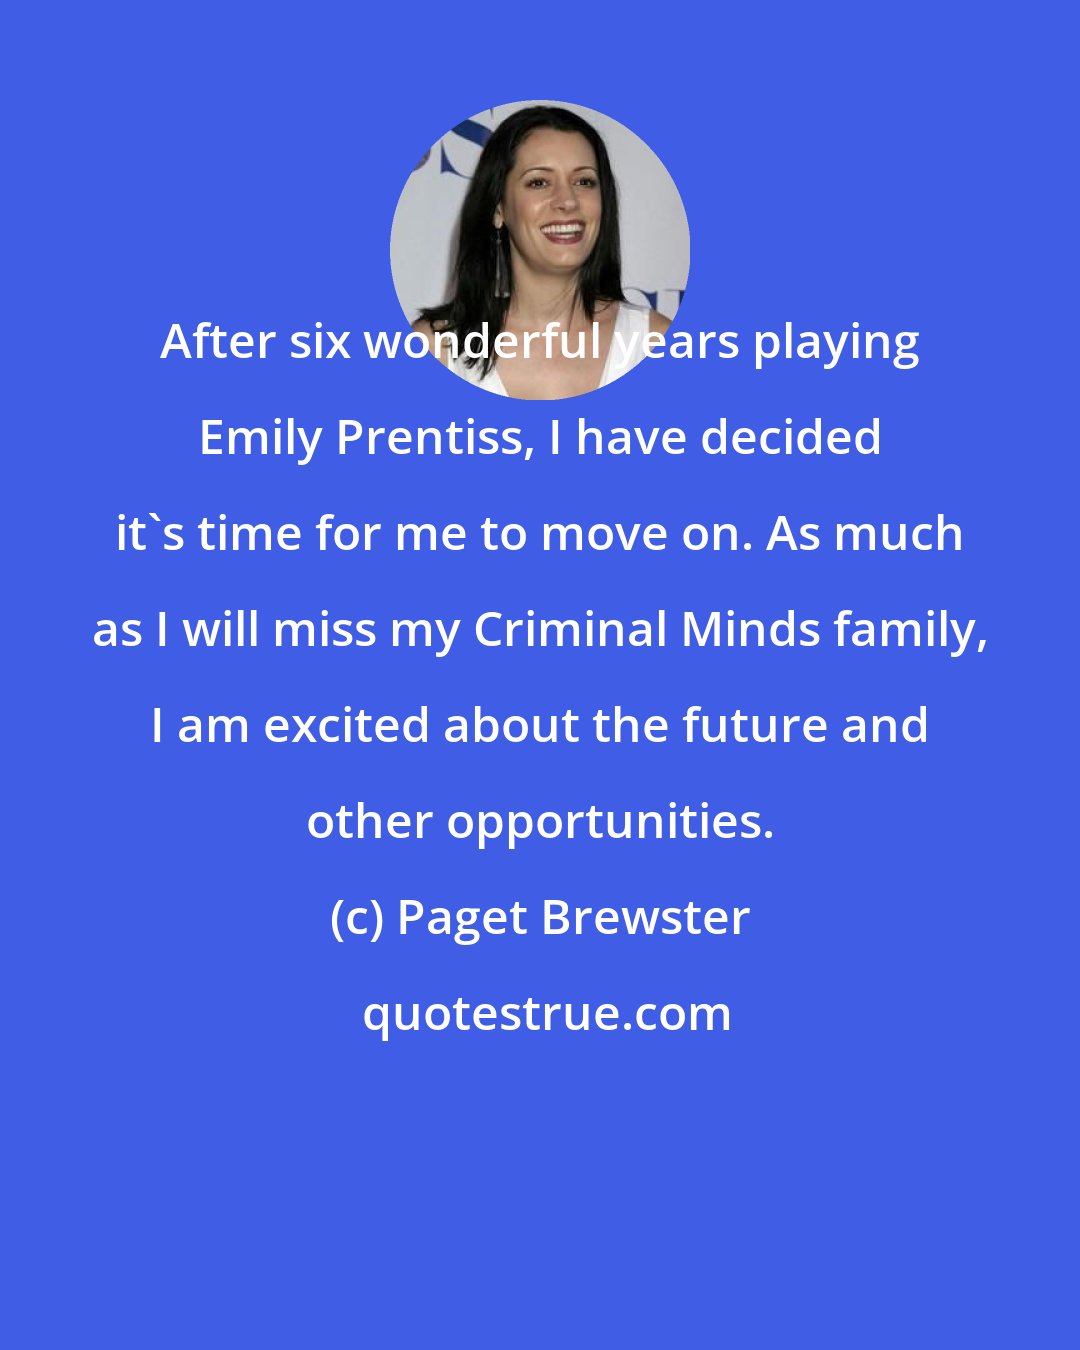 Paget Brewster: After six wonderful years playing Emily Prentiss, I have decided it's time for me to move on. As much as I will miss my Criminal Minds family, I am excited about the future and other opportunities.